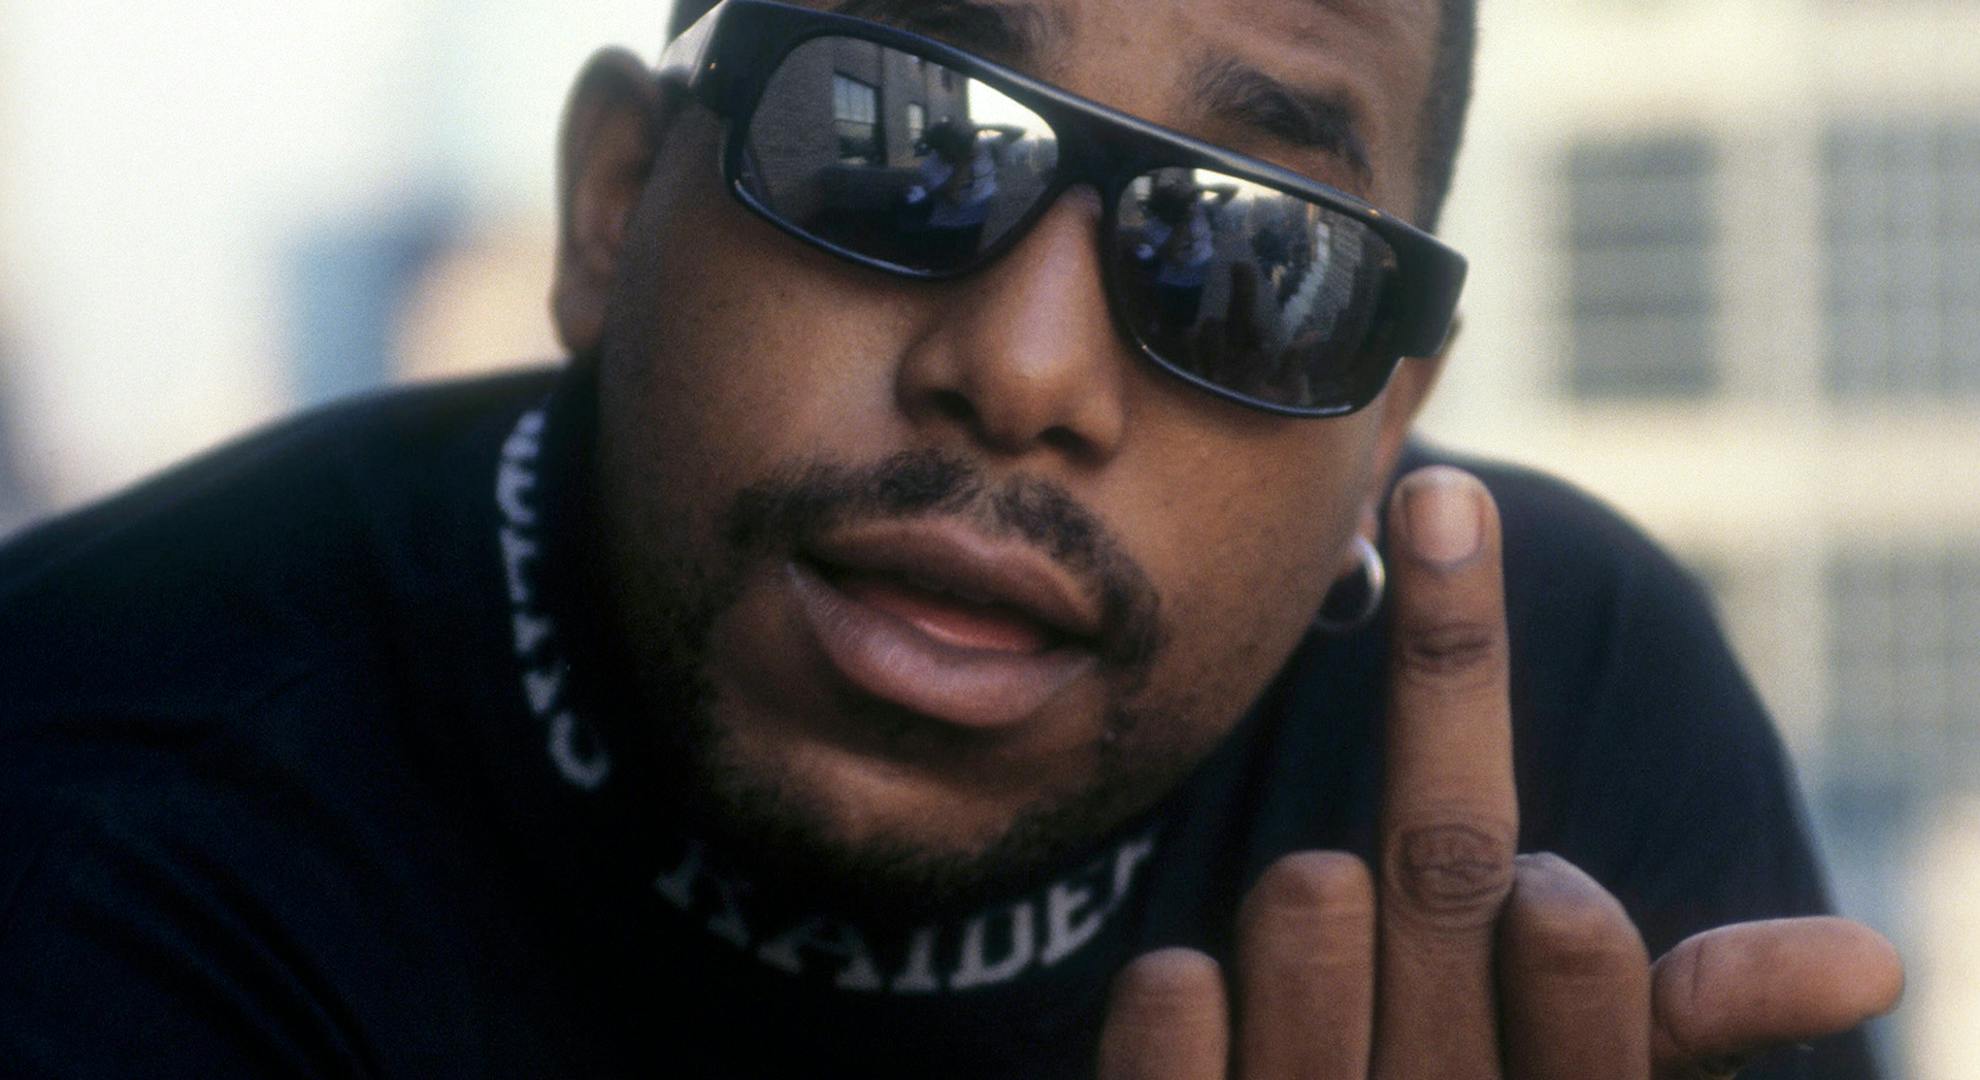 Rapper Tone Loc gives a "middle finger" obscene gesture when he appears in a portrait taken on October 10, 1991 in New York City. 